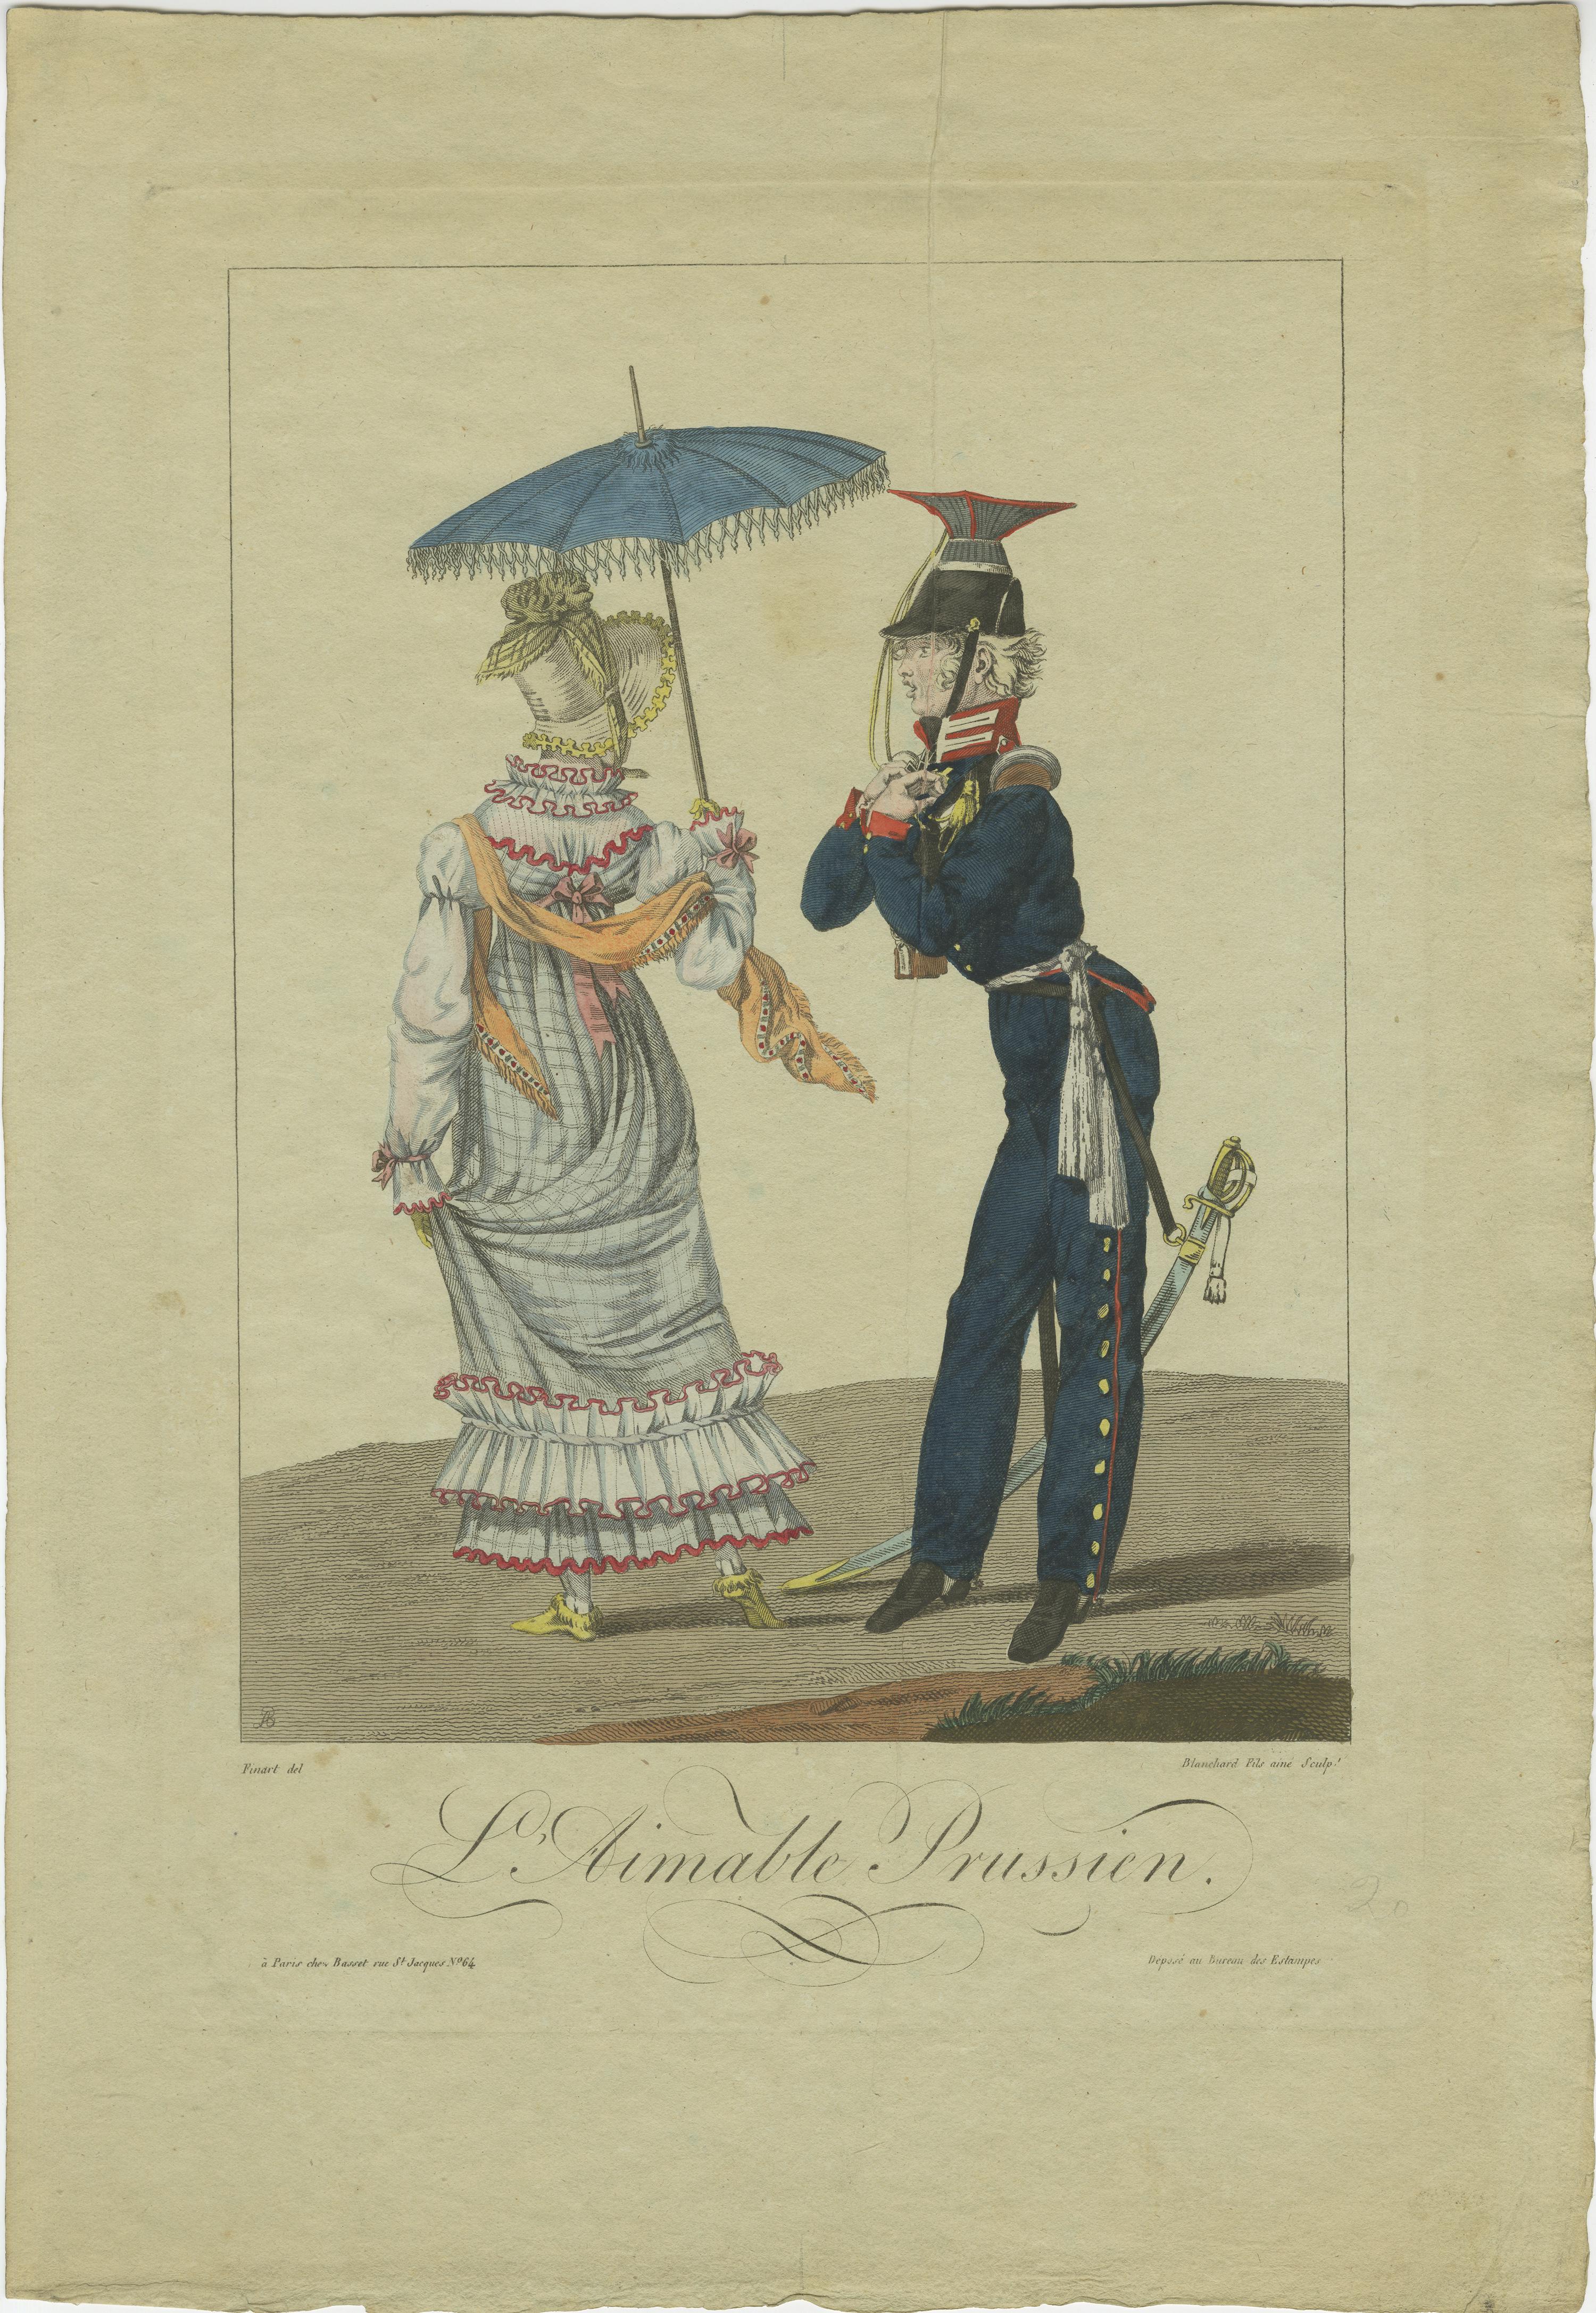 Two hundred year old engraving of a Prussian soldier being friendly to a nicely dressed lady holding an umbrella. 

Les Alliés à Paris and 1815, Scenes de Moeurs: La Nouvelle fashion ou l'Ecossais à Paris. Friendly Soldier from Prussian regiment